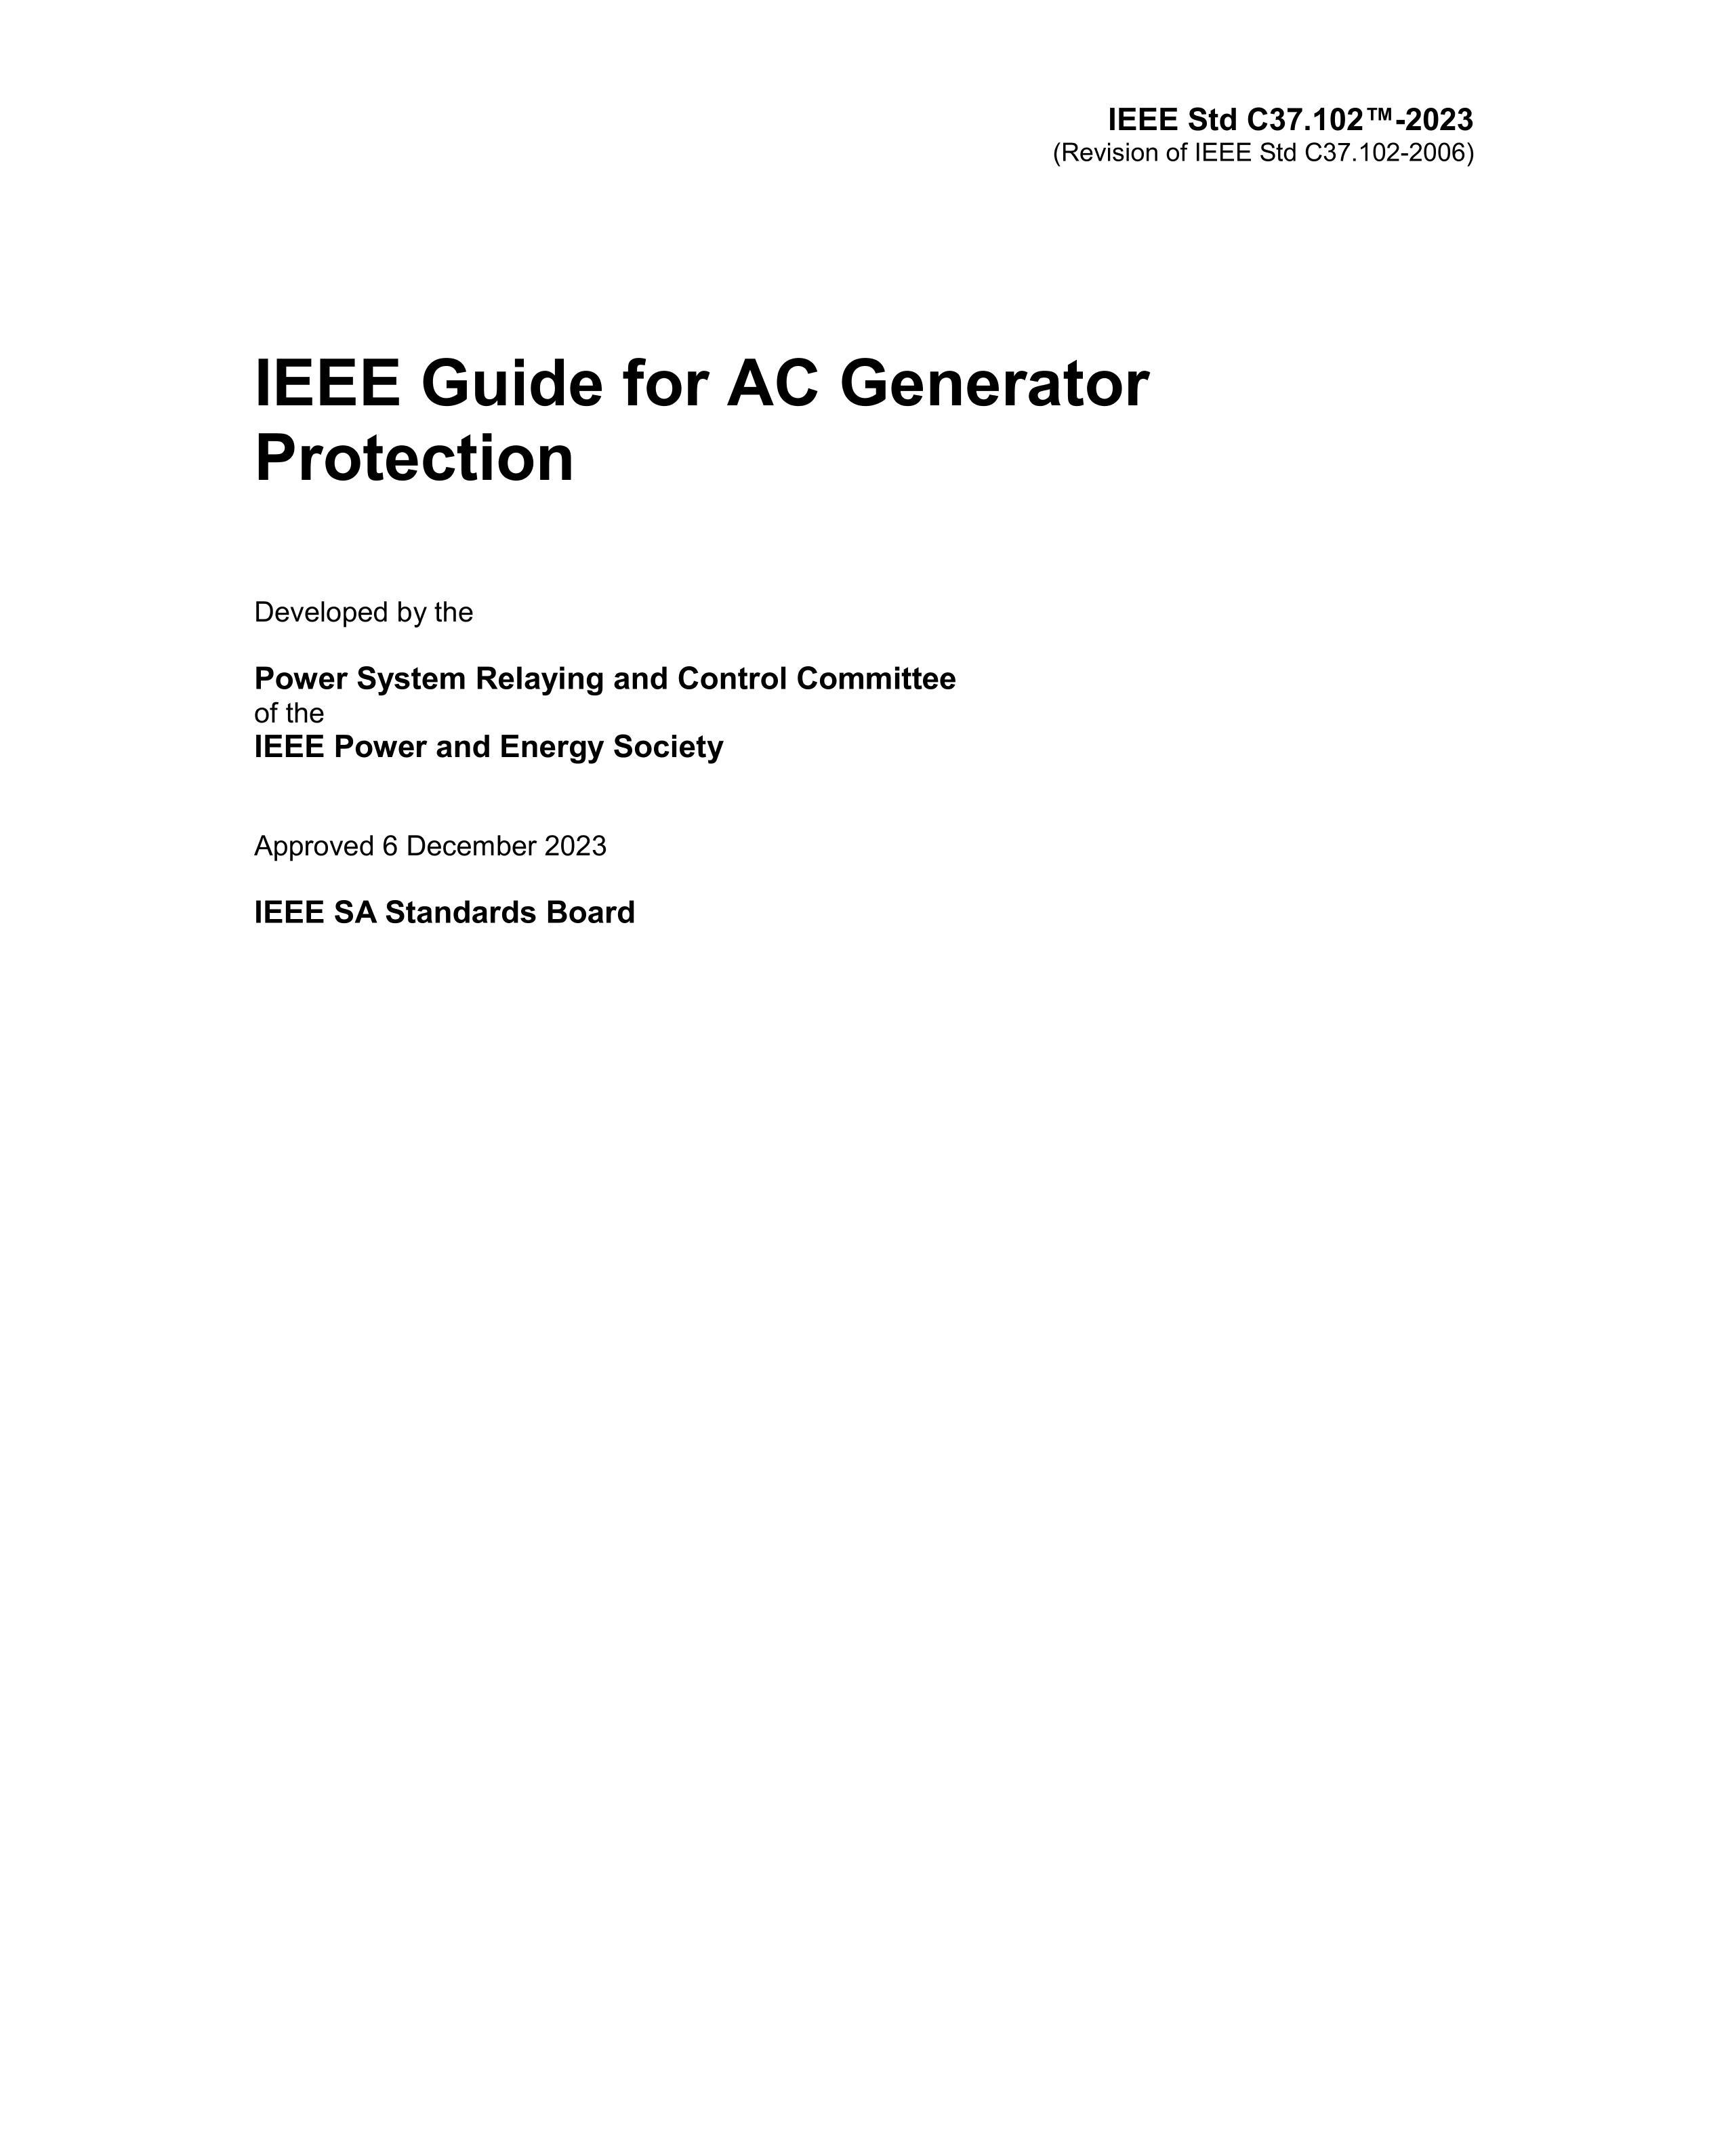 IEEE Std C37.102-2023 IEEE Guide for AC Generator Protection.pdf2ҳ